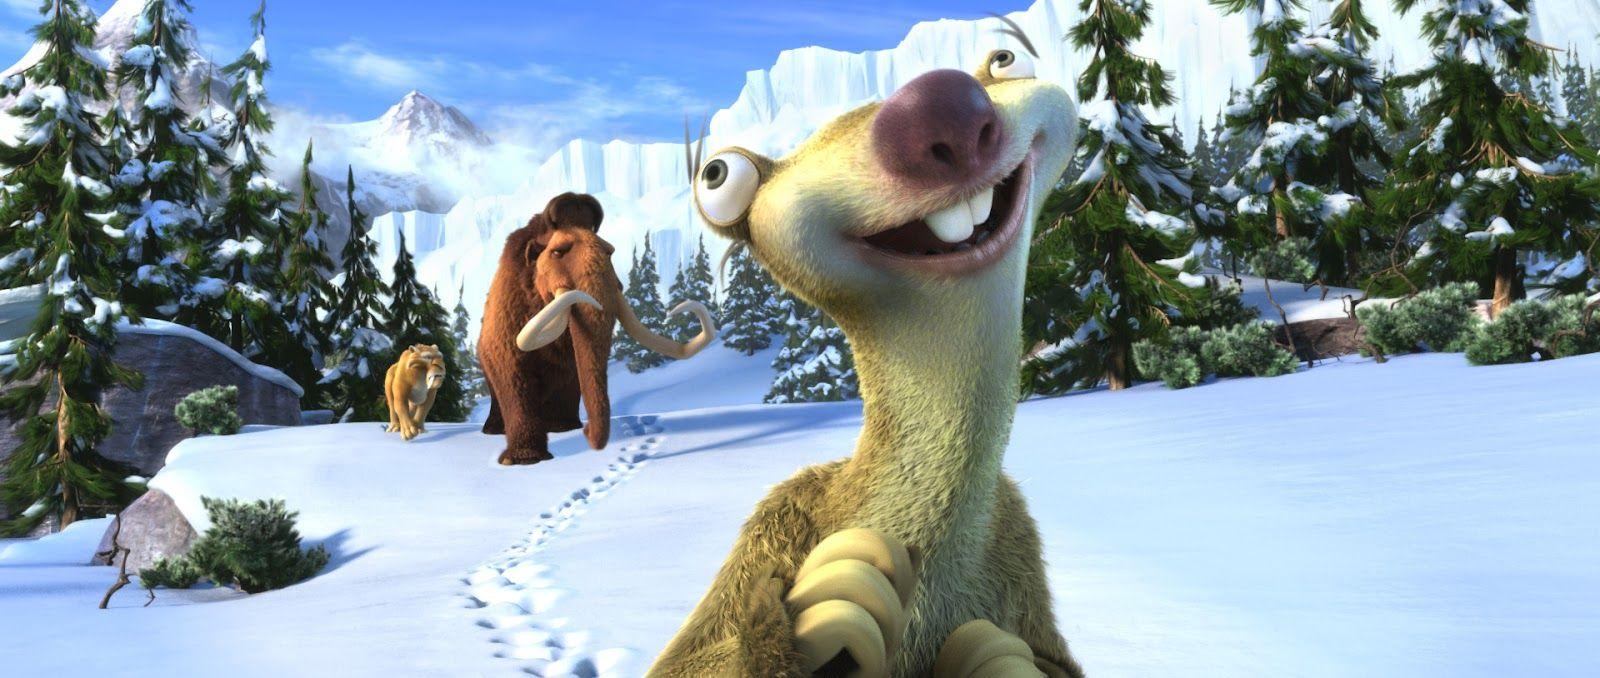 Ice Age: Sid image Here Granny HD wallpaper and background photo